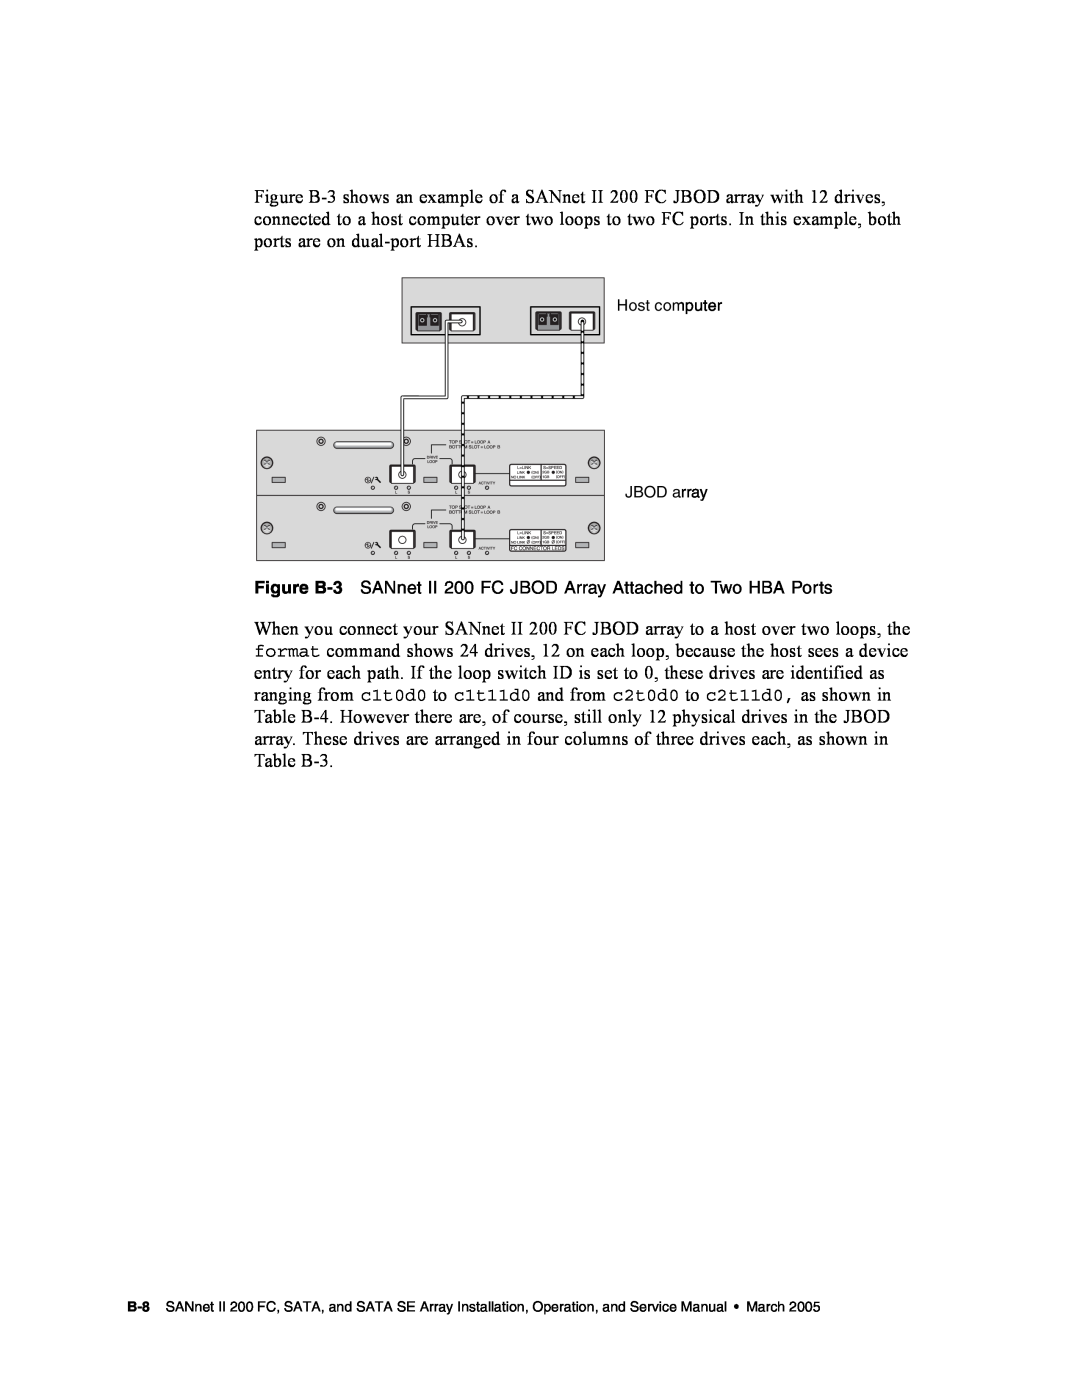 Dot Hill Systems service manual Figure B-3, SANnet II 200 FC JBOD Array Attached to Two HBA Ports 